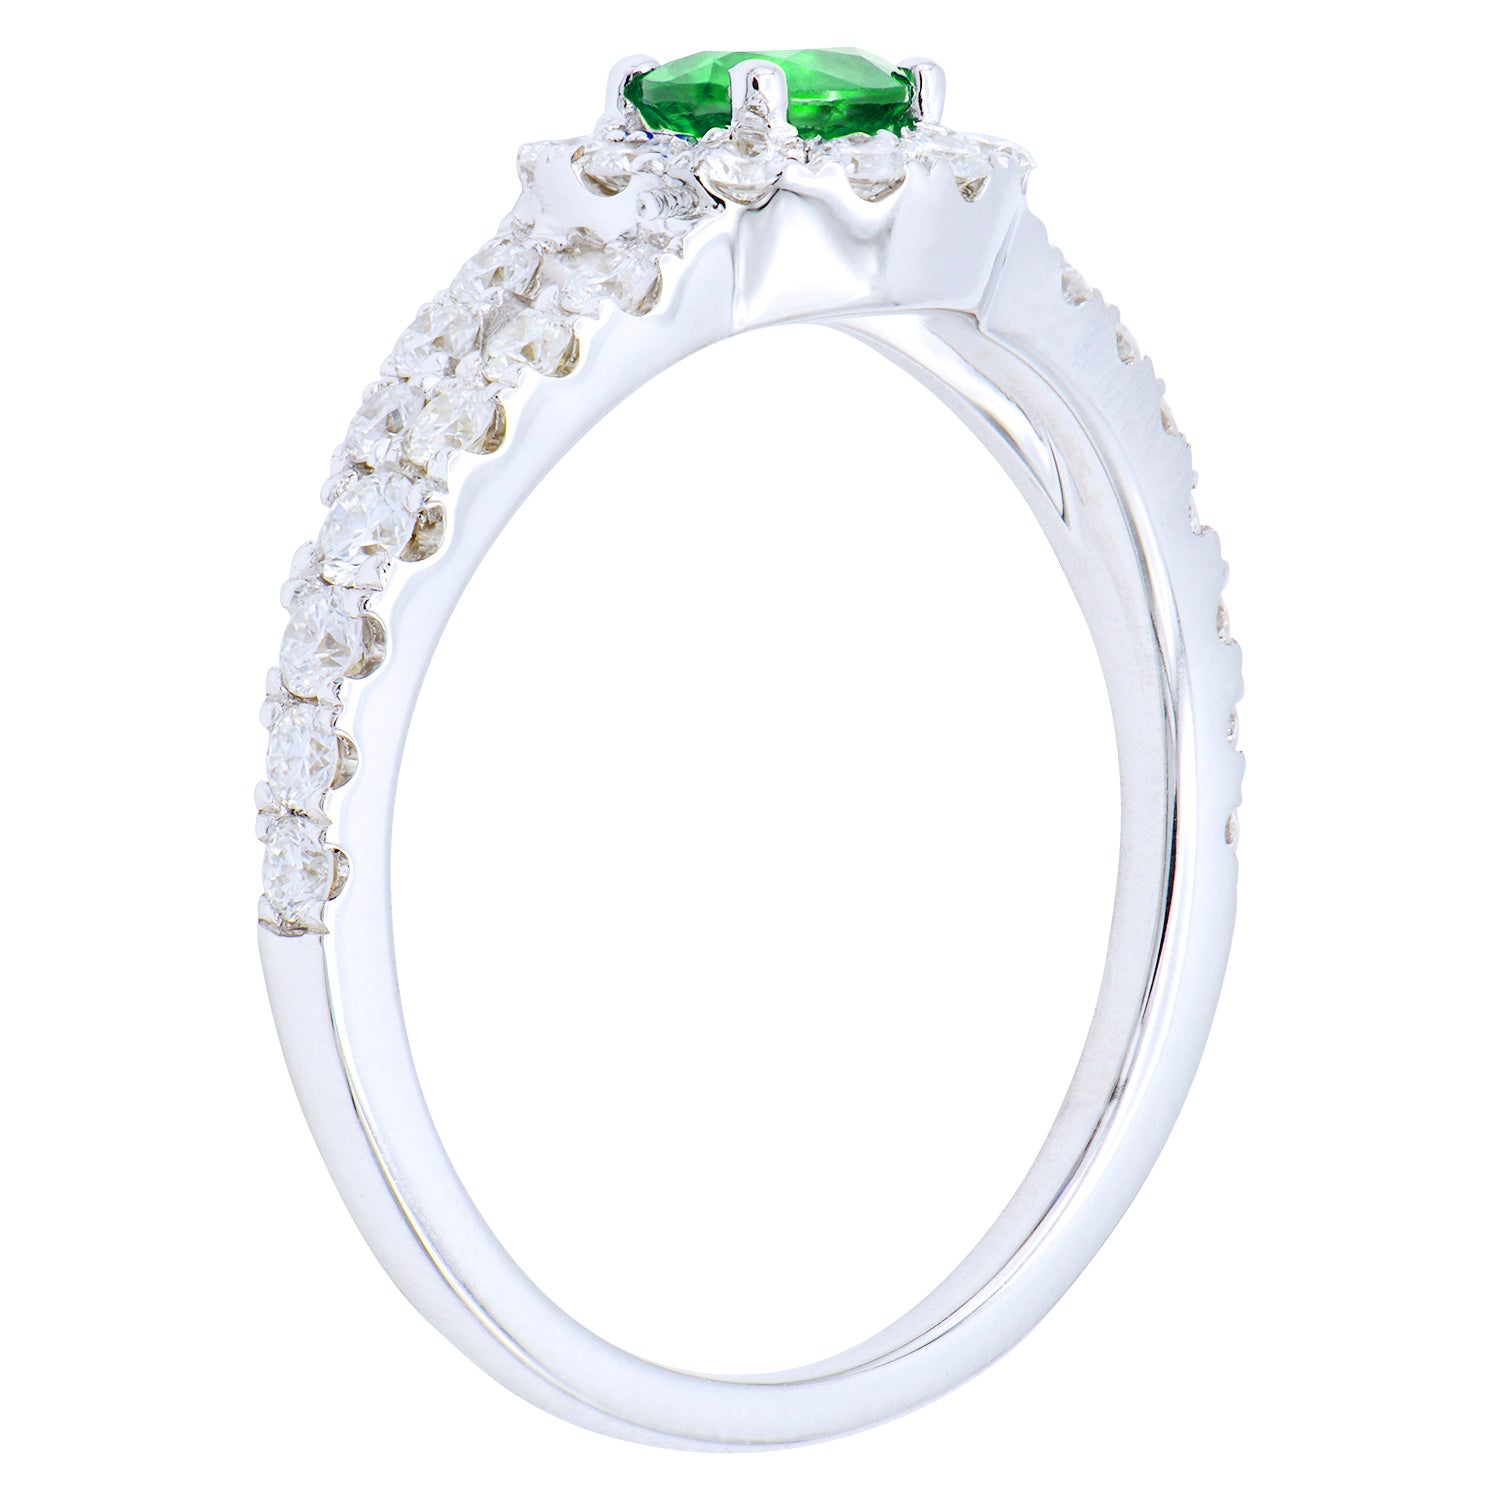 14K White Gold Emerald and Diamond Ring